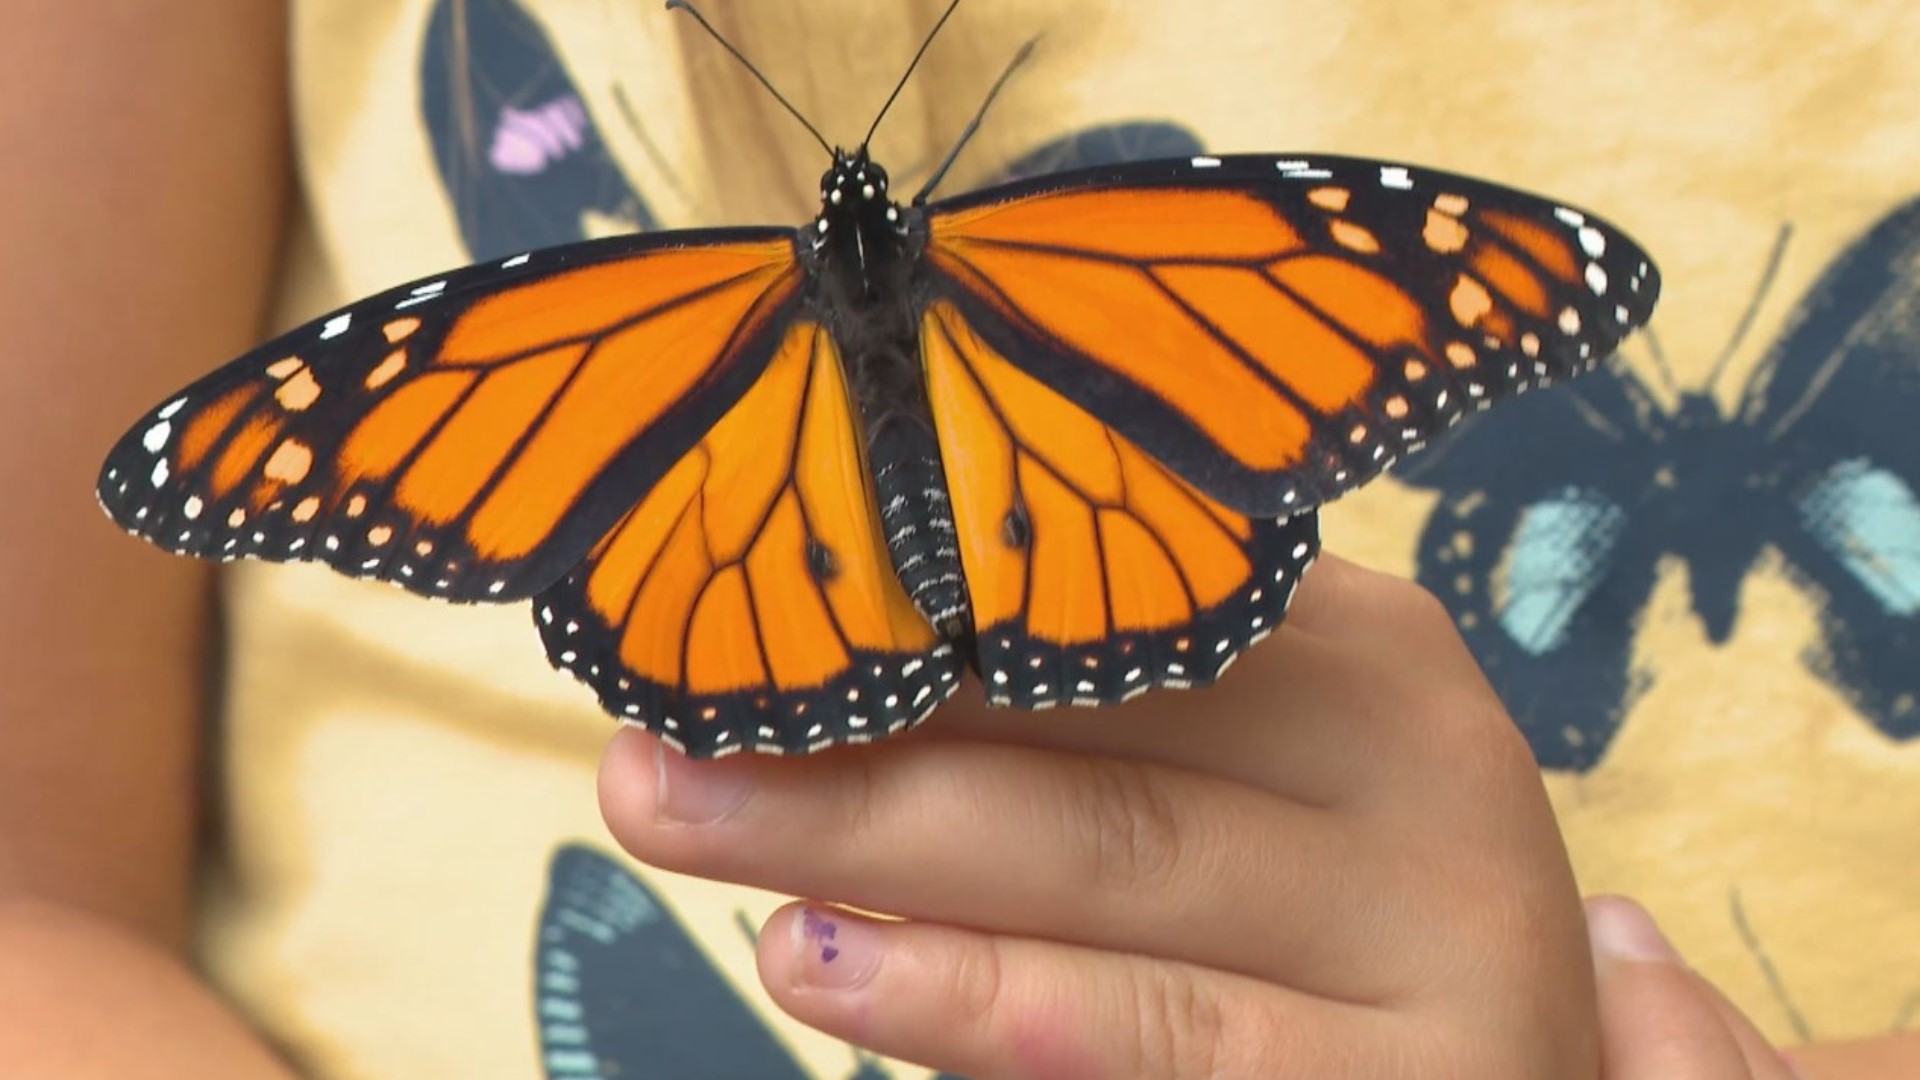 Cara Dever, Patricia Schuh and Liz Masur are spearheading a Lawrence neighborhood's new community monarch butterfly garden.